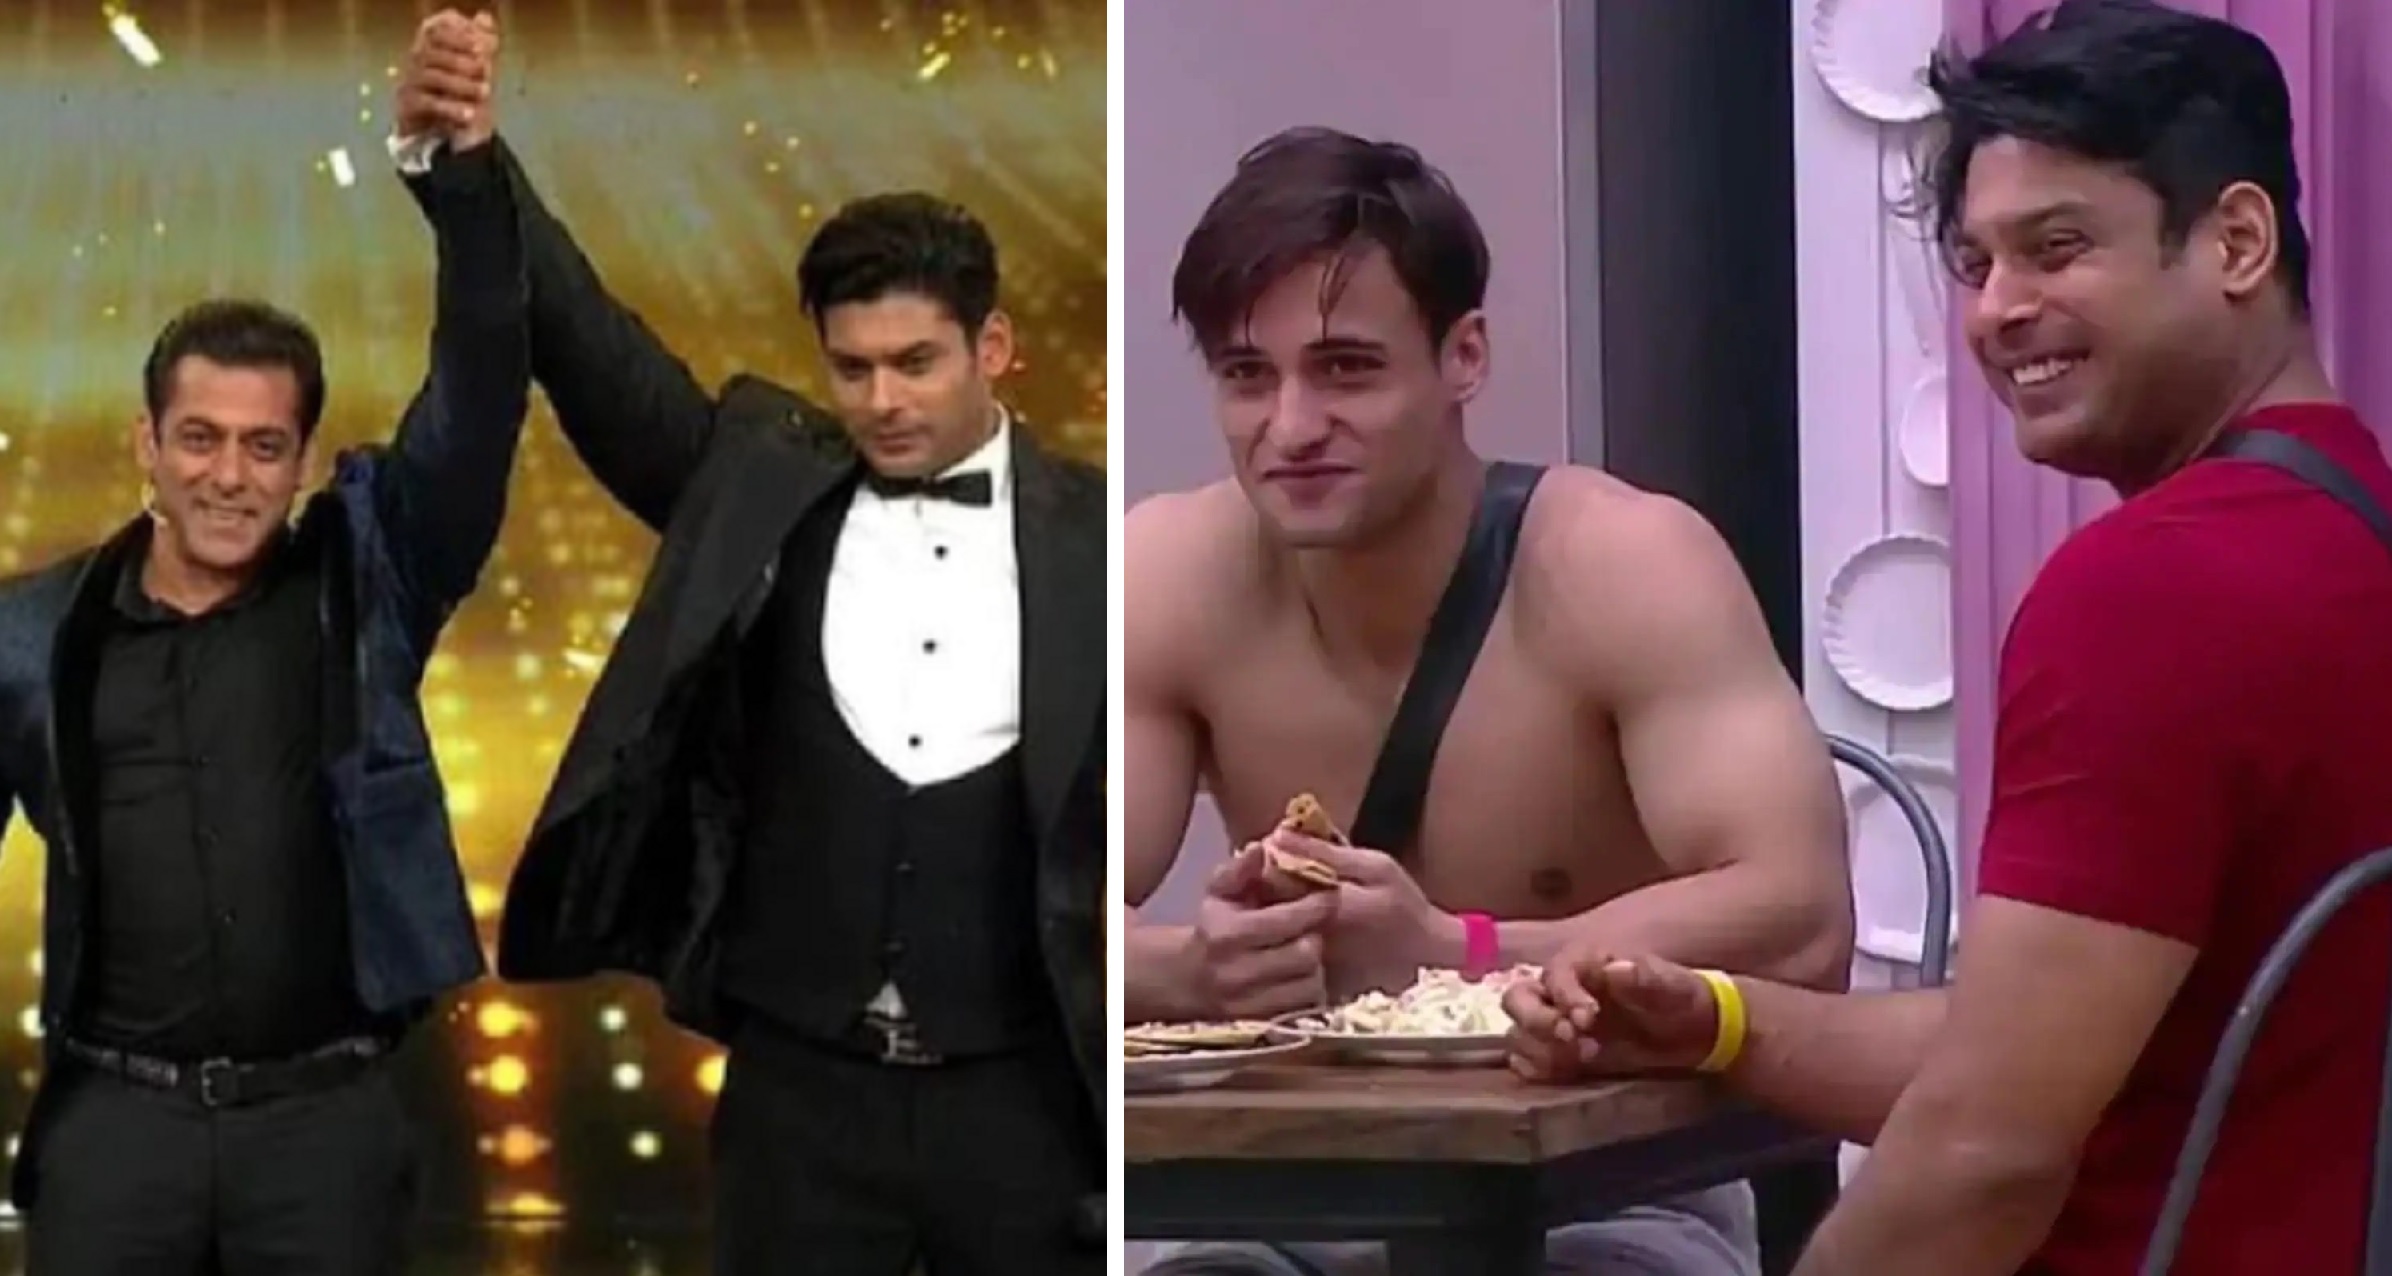 Asim Riaz Claims Sidharth Shukla’s Bigg Boss 13 Win Was Scripted, “They didn’t want me to win”